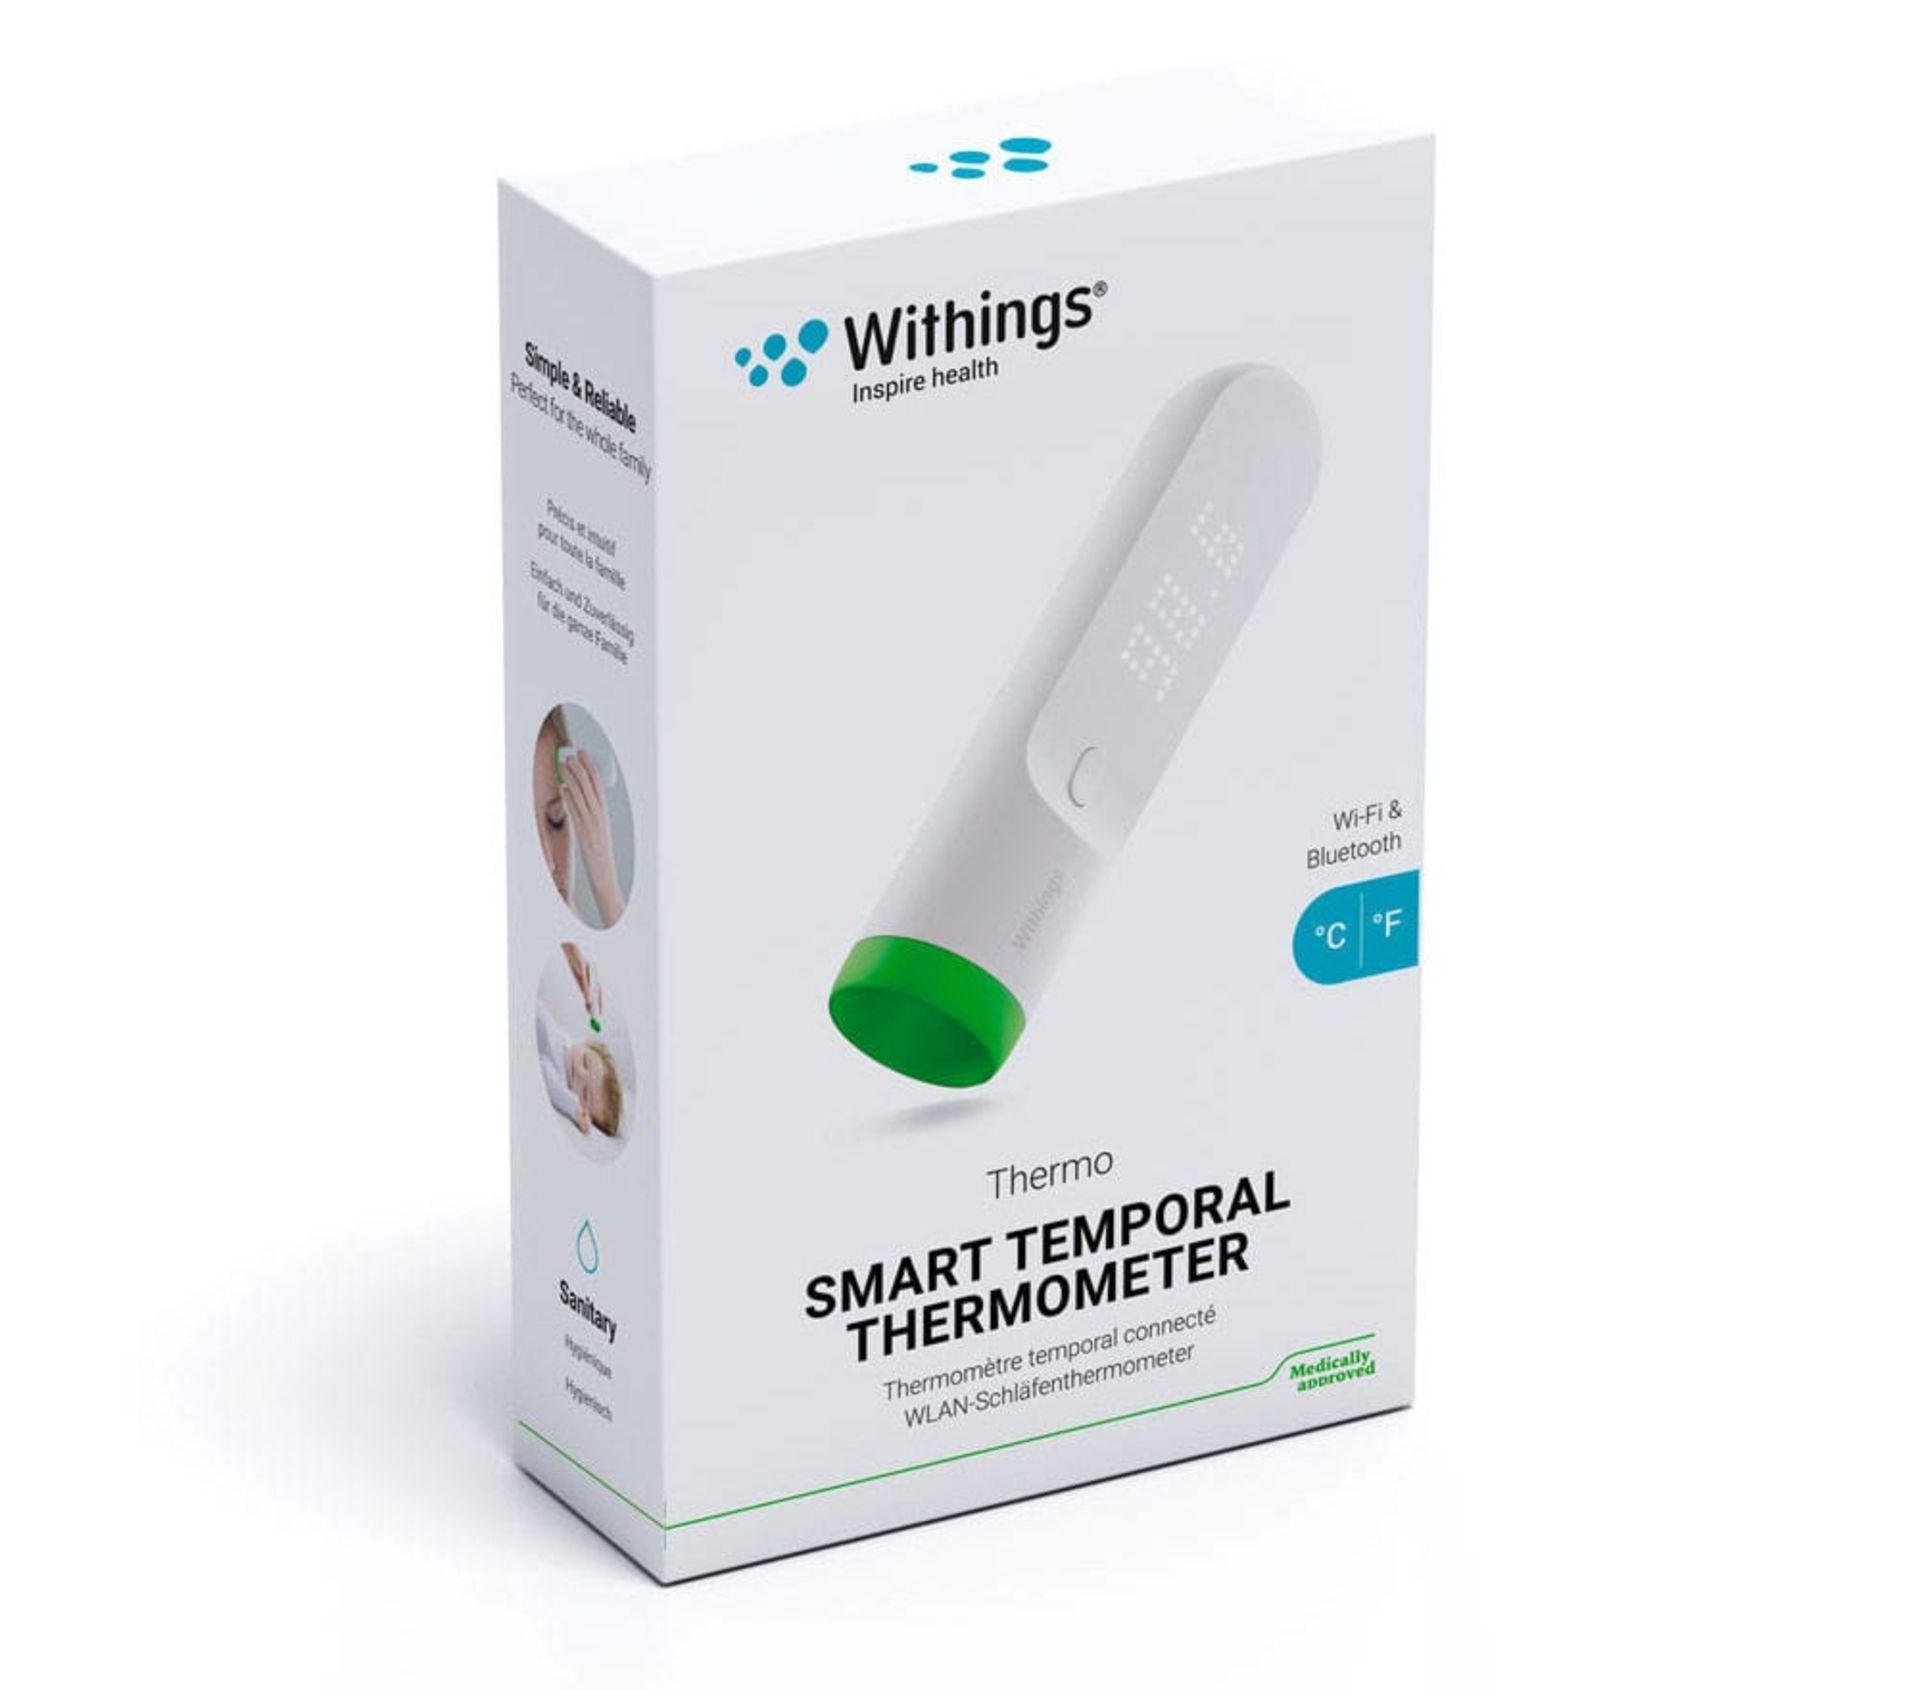 TRADE LOT 10 X BRAND NEW WITHINGS THERMO SMART TEMPORAL THERMOMETERS RRP £119 EACH R9.7